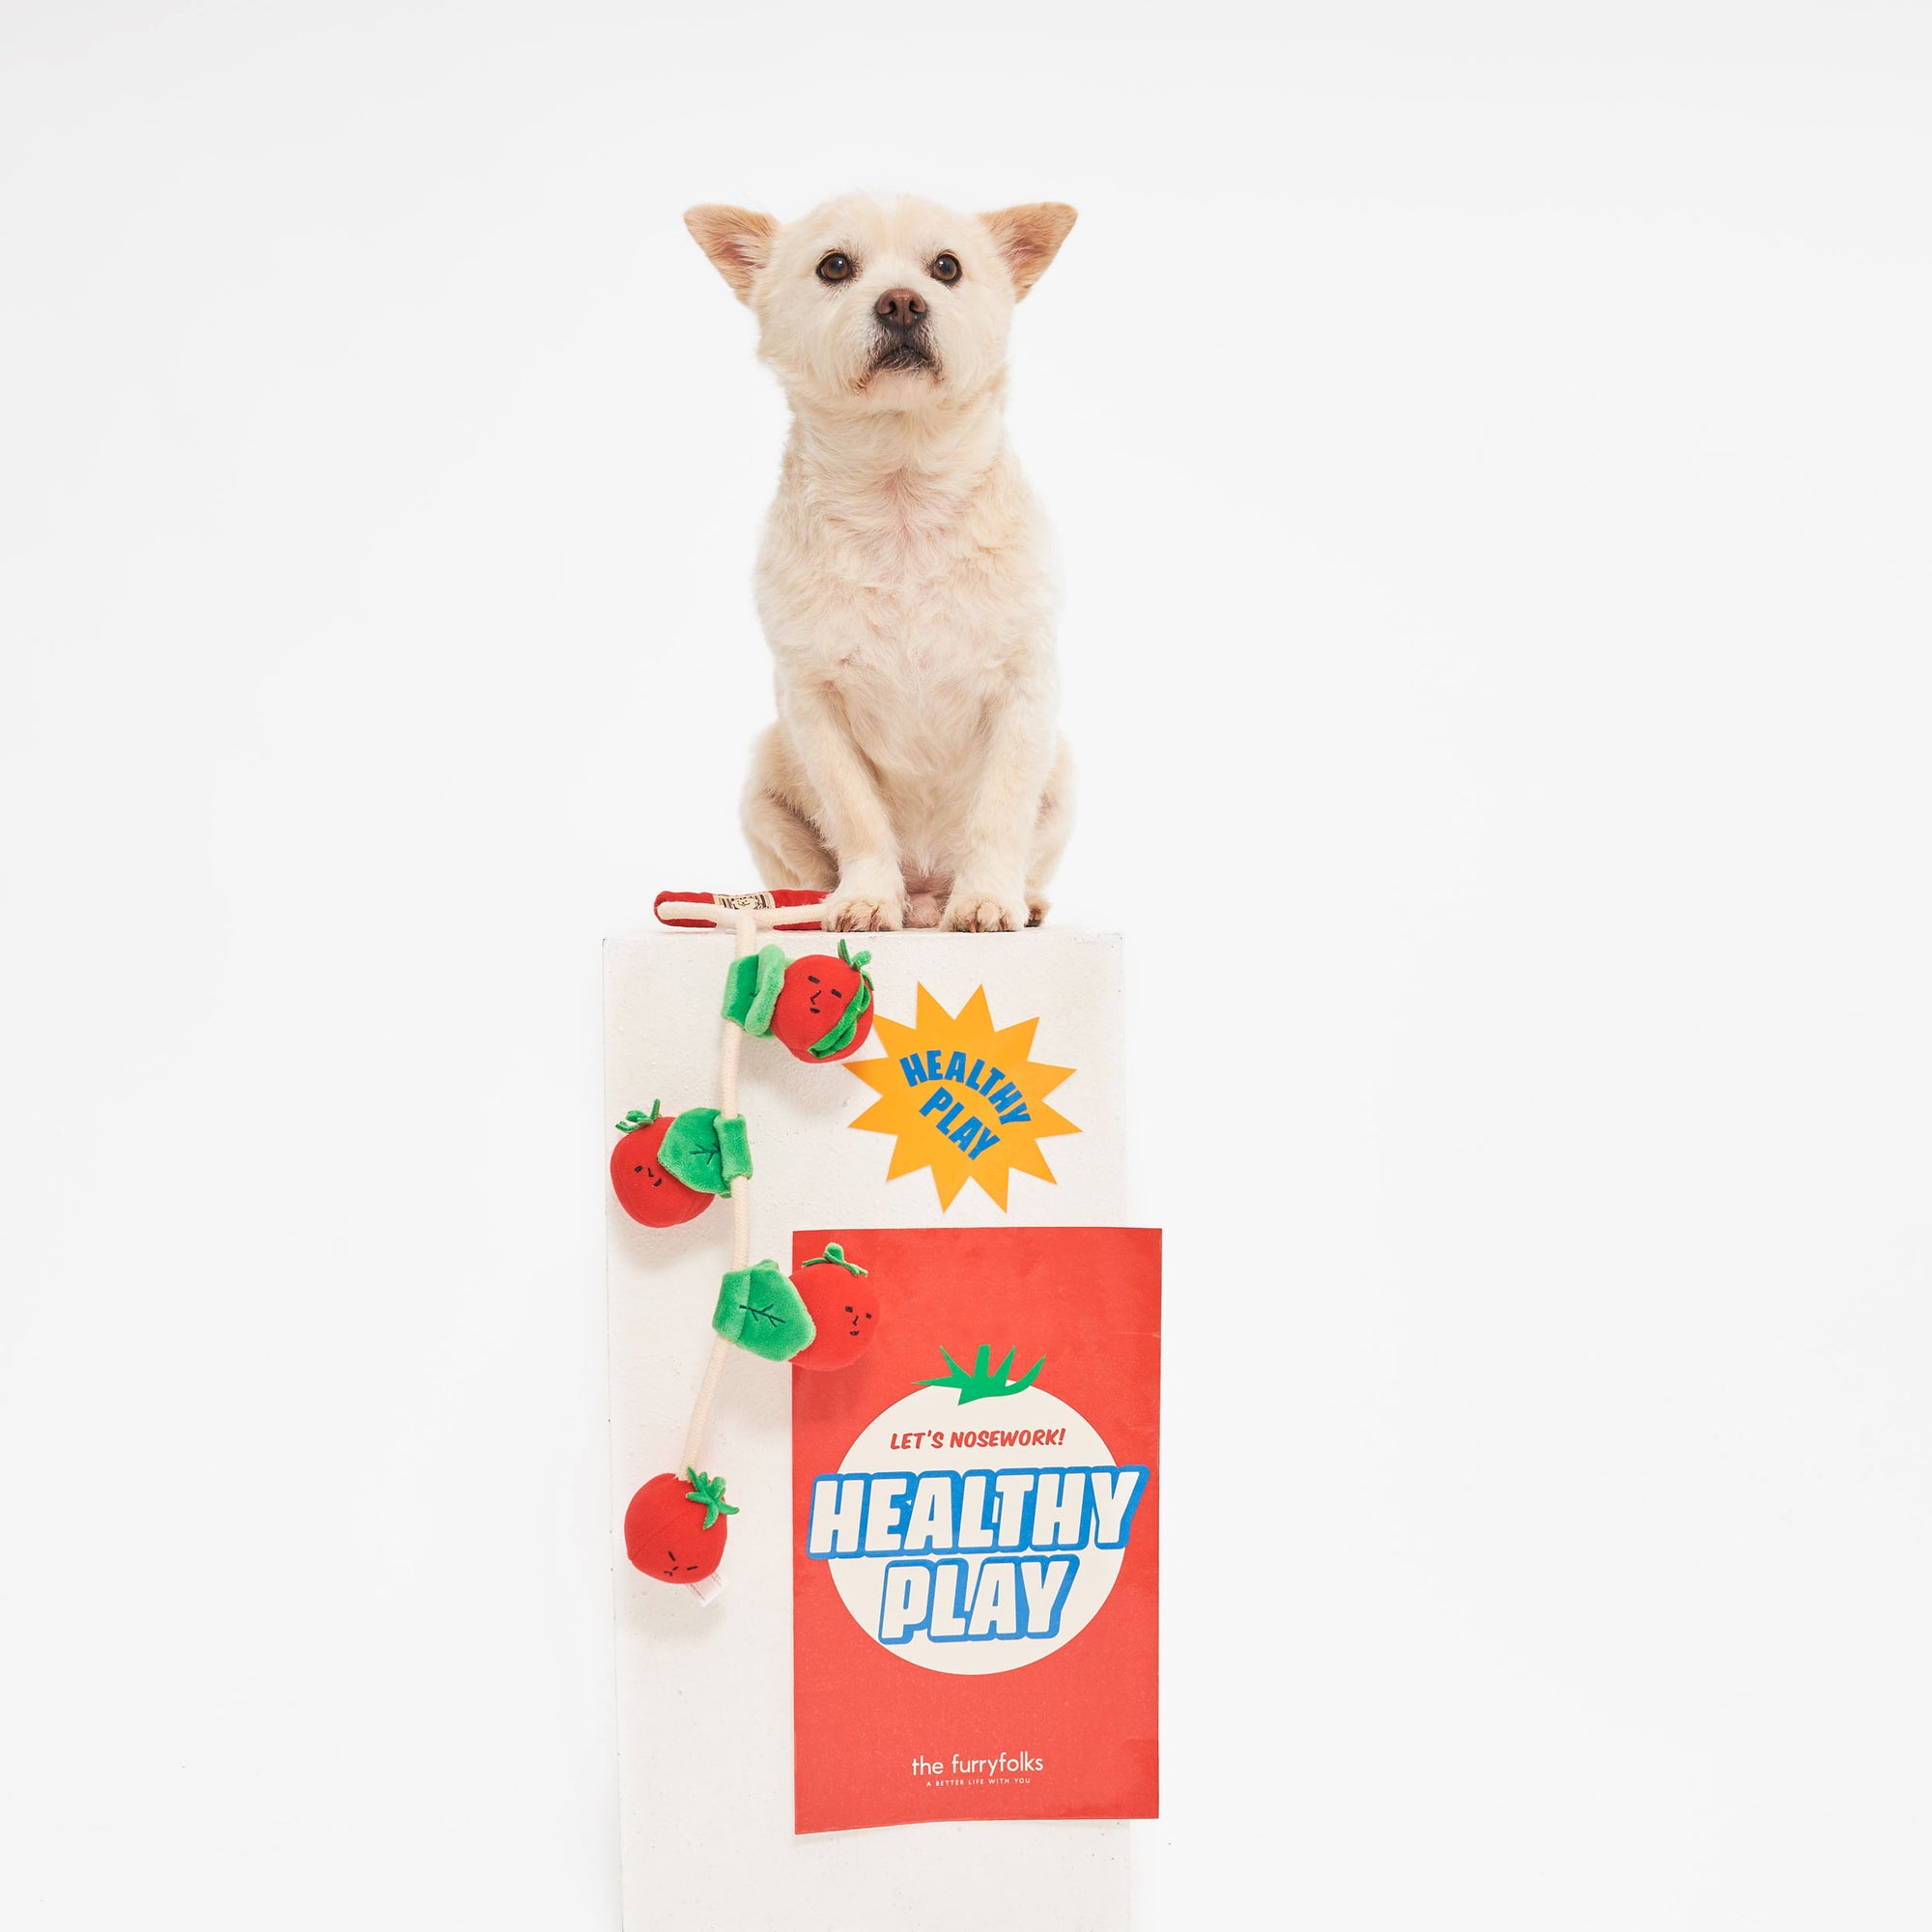 The image shows a small, light-colored dog sitting on a platform with the text "HEALTHY FUN," and "LET'S NOSEWORK! HEALTHY PLAY" on posters, along with a string of plush tomato toys. This setup, including "the furryfolks" brand, likely promotes engaging and healthy play for pets.